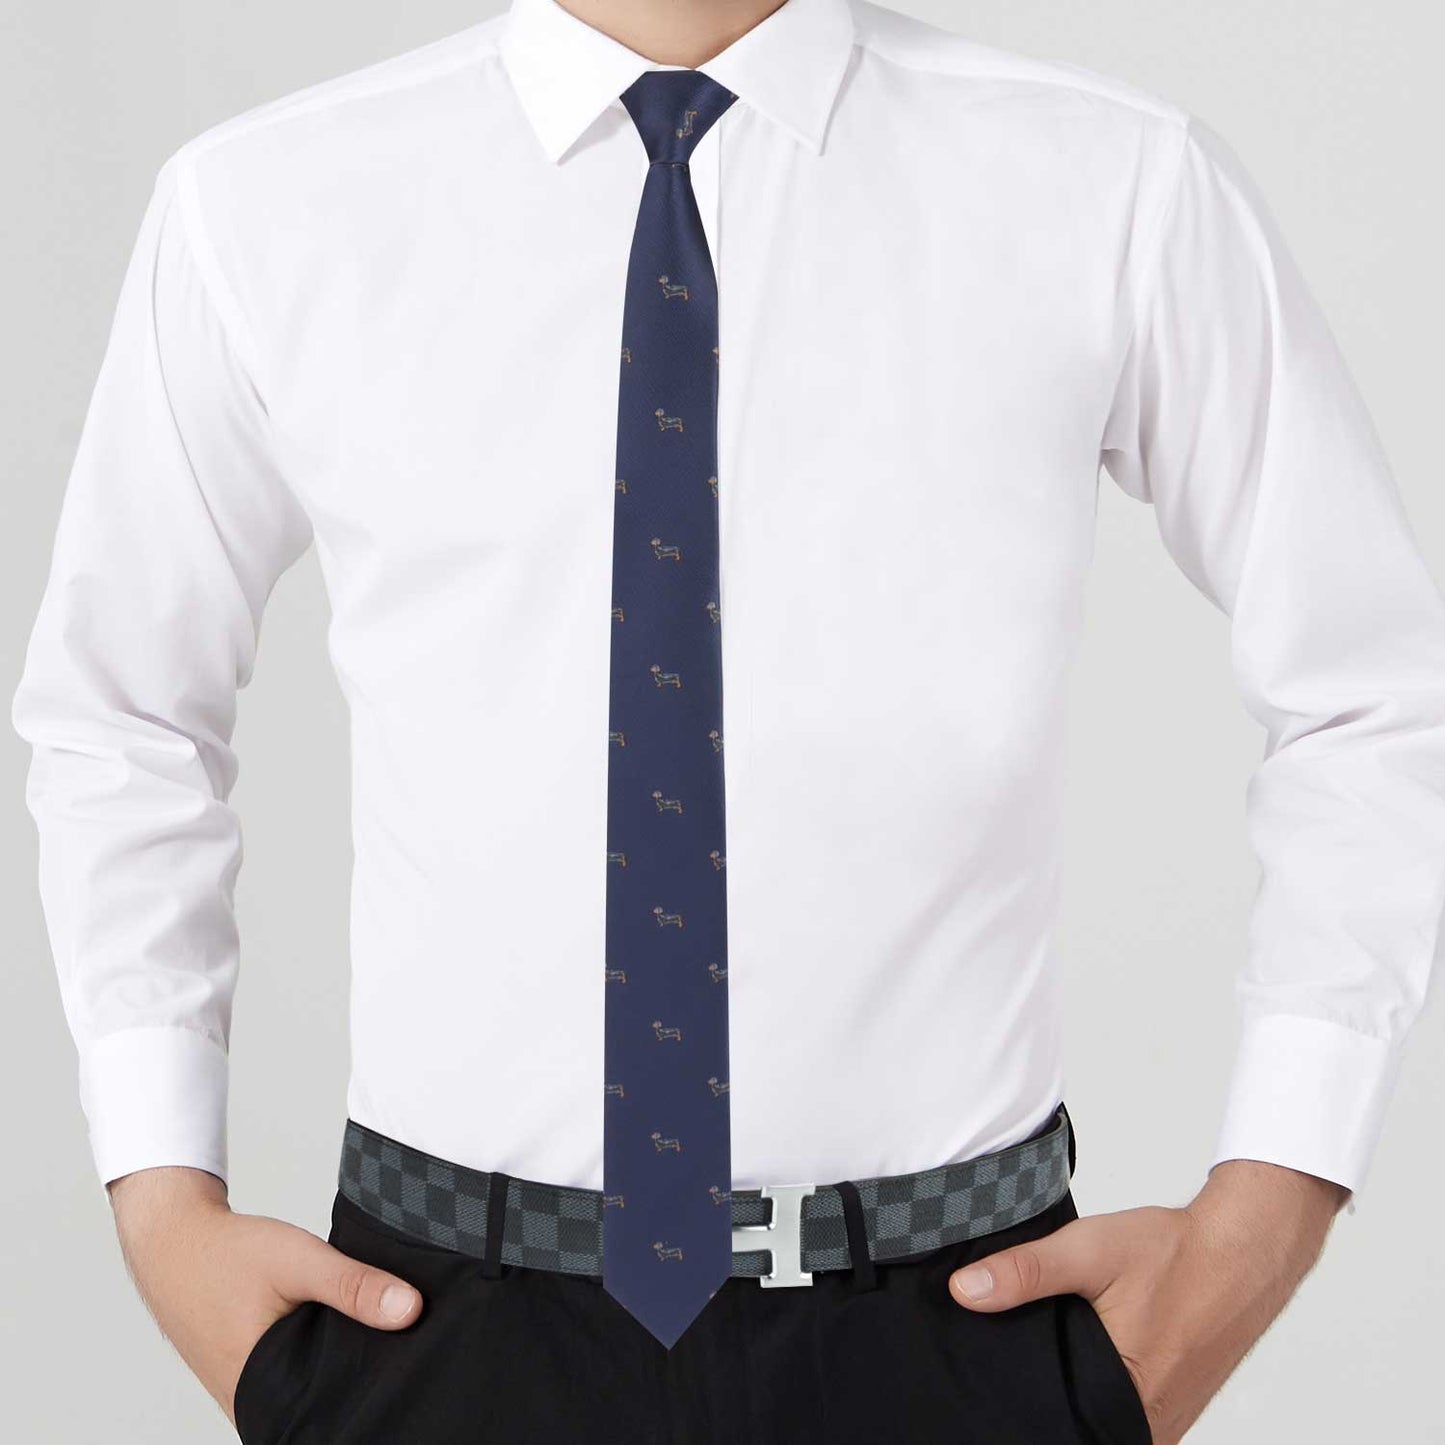 A man with a quirky charm wearing a Sausage Dog Skinny Tie and white shirt.